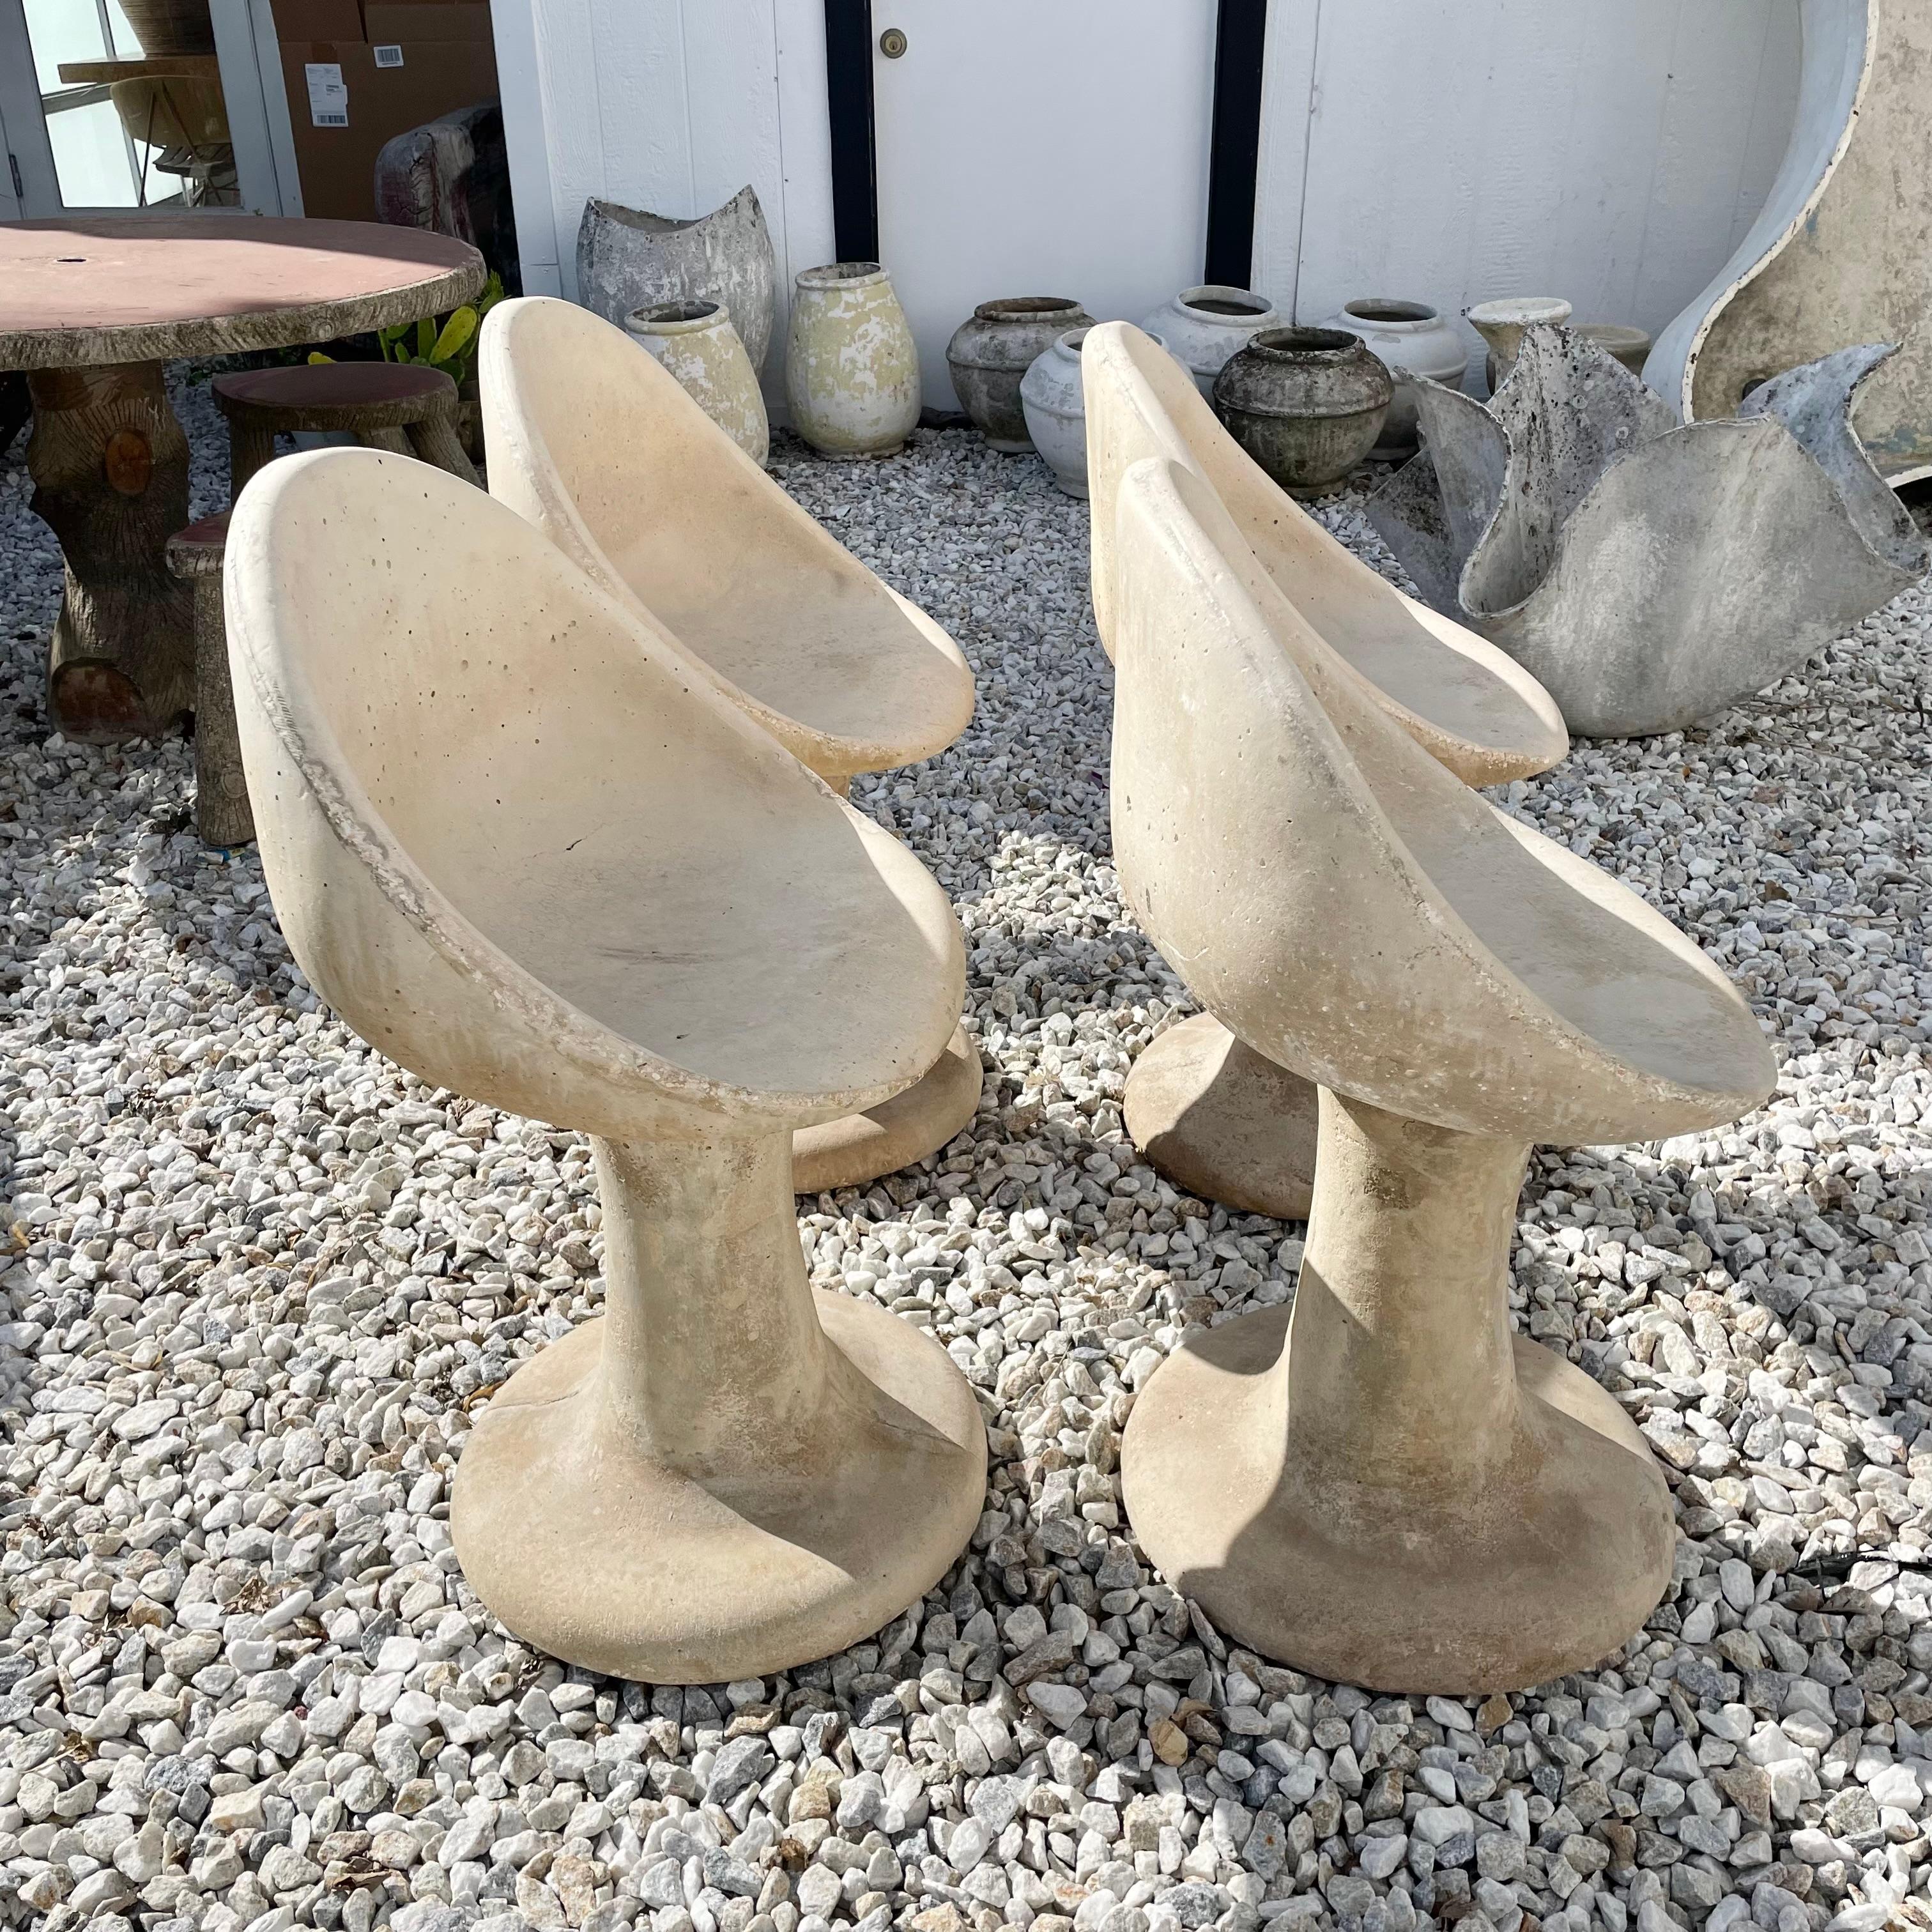 American Willy Guhl Style Concrete Tulip Chairs, 1970s USA For Sale